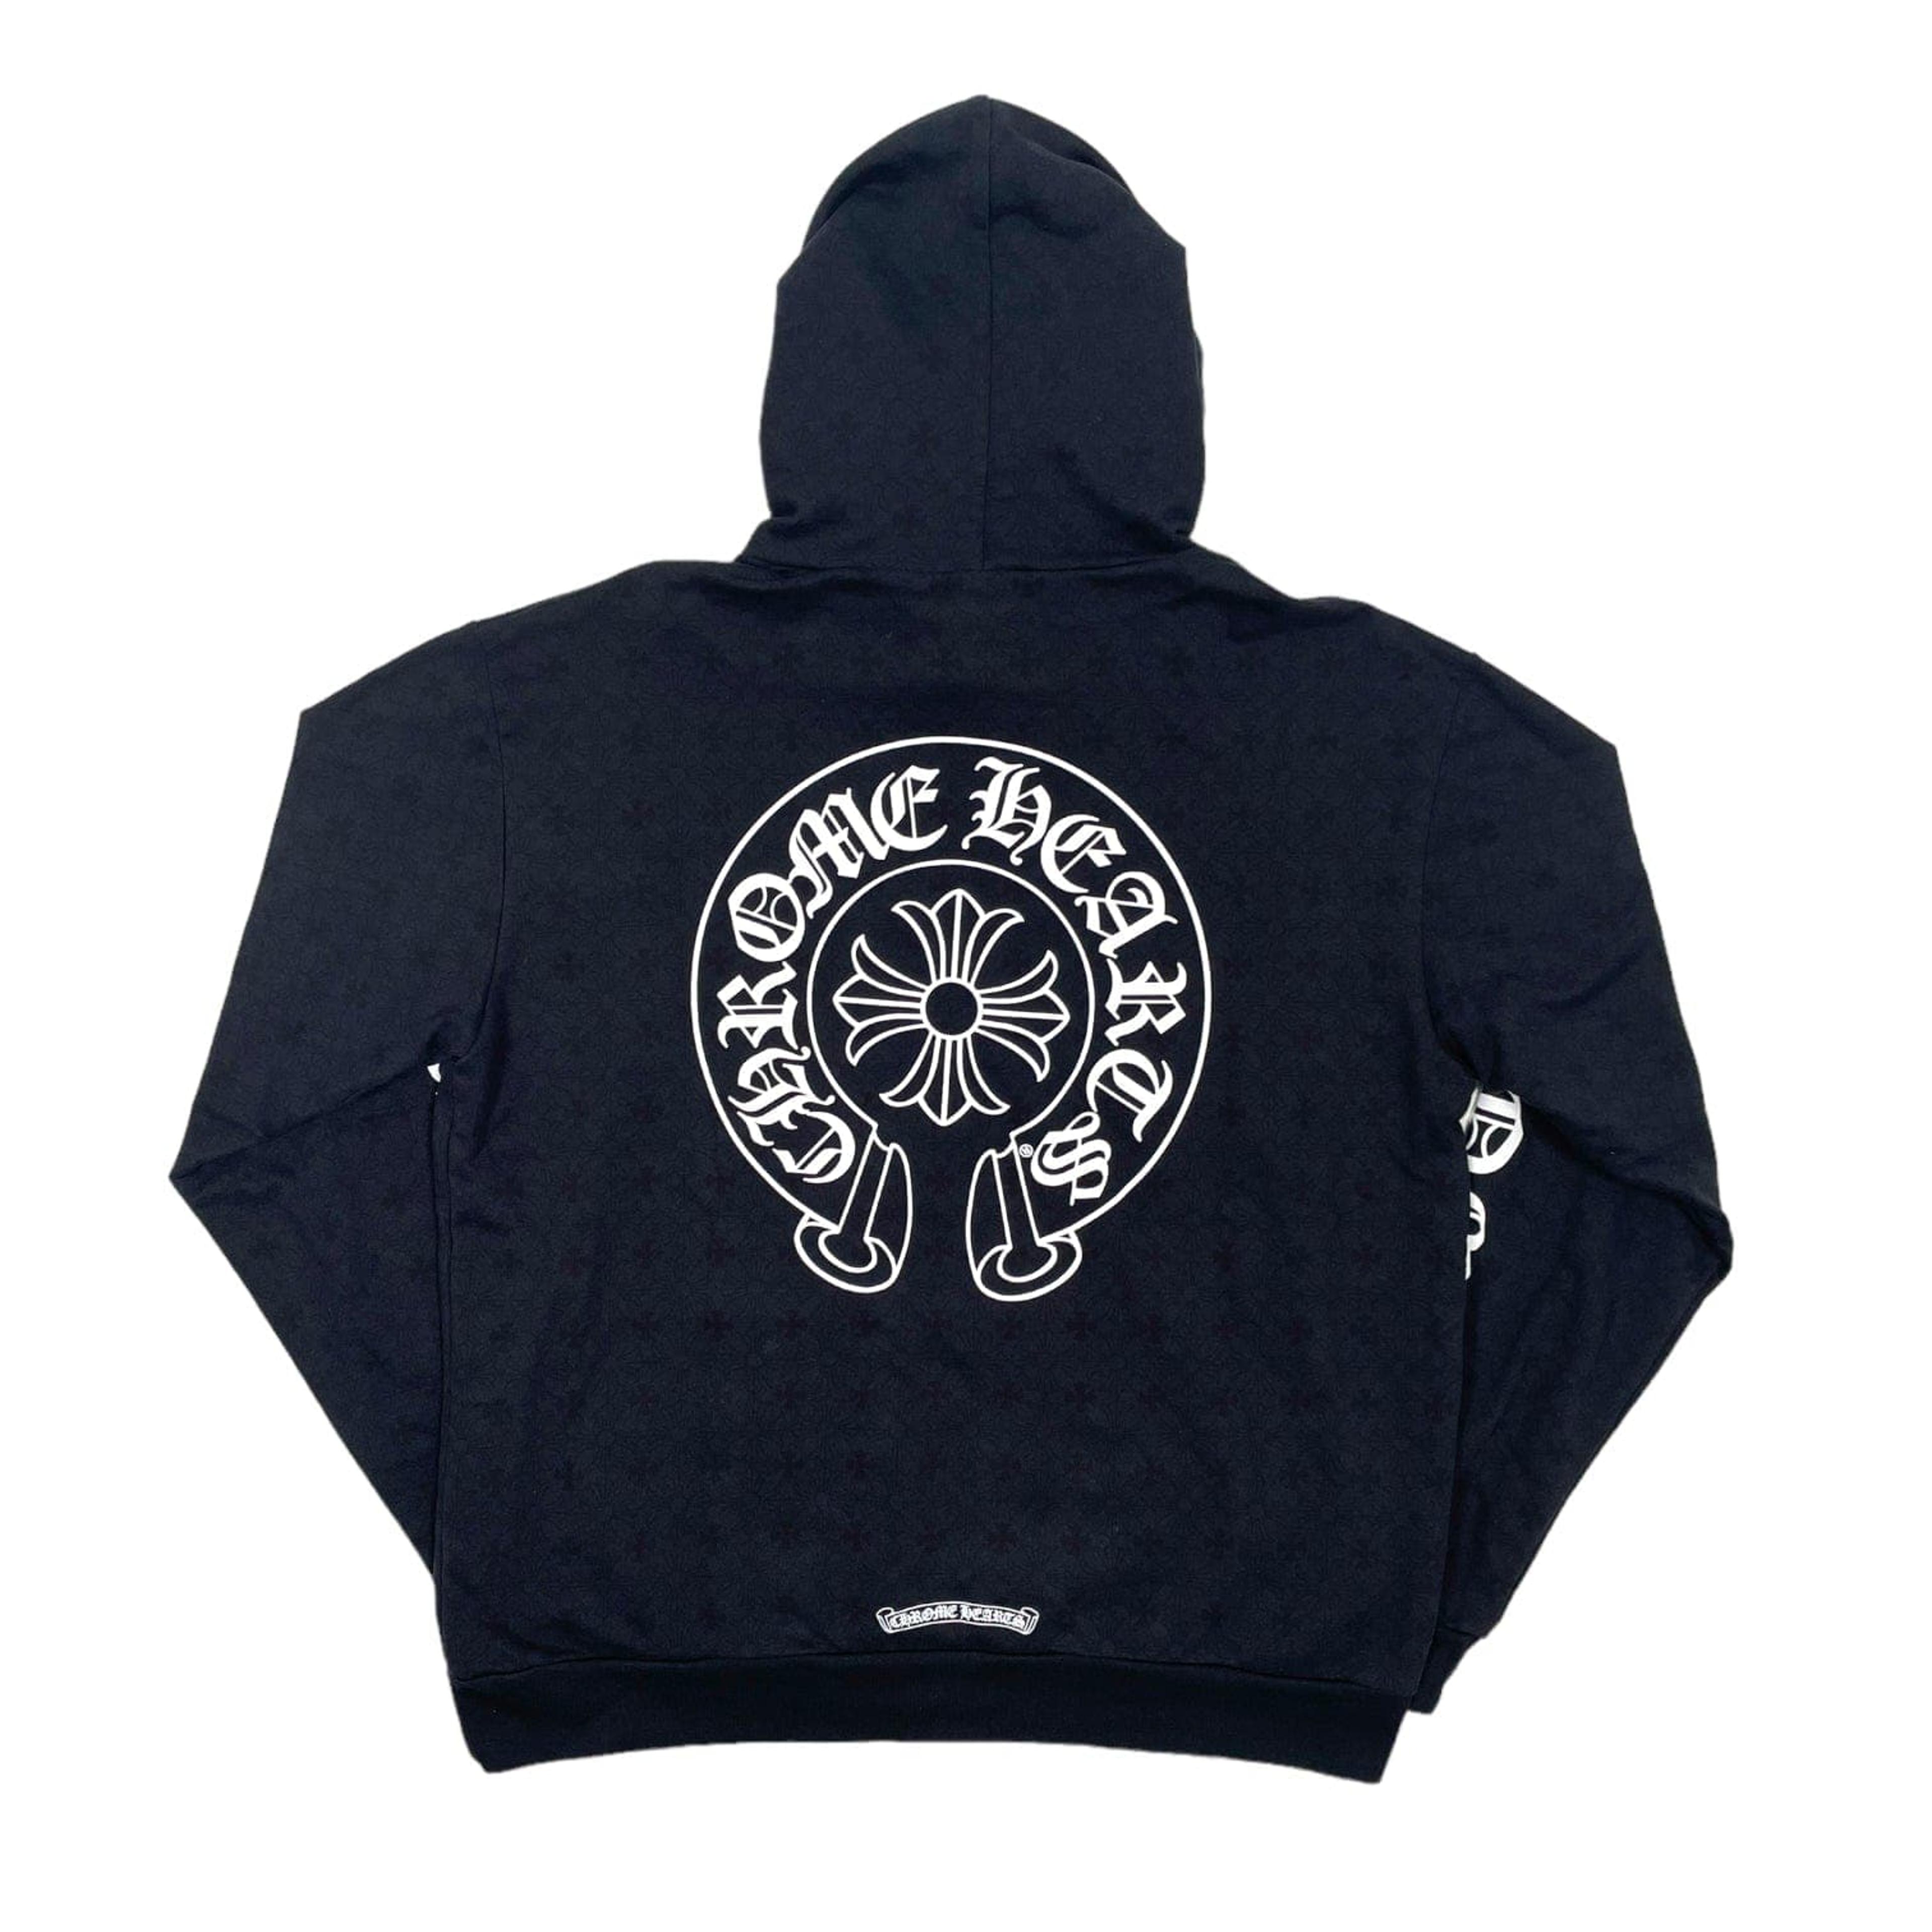 Alternate View 1 of Chrome Hearts Sublimated Vertical Logo Hooded Sweatshirt Black